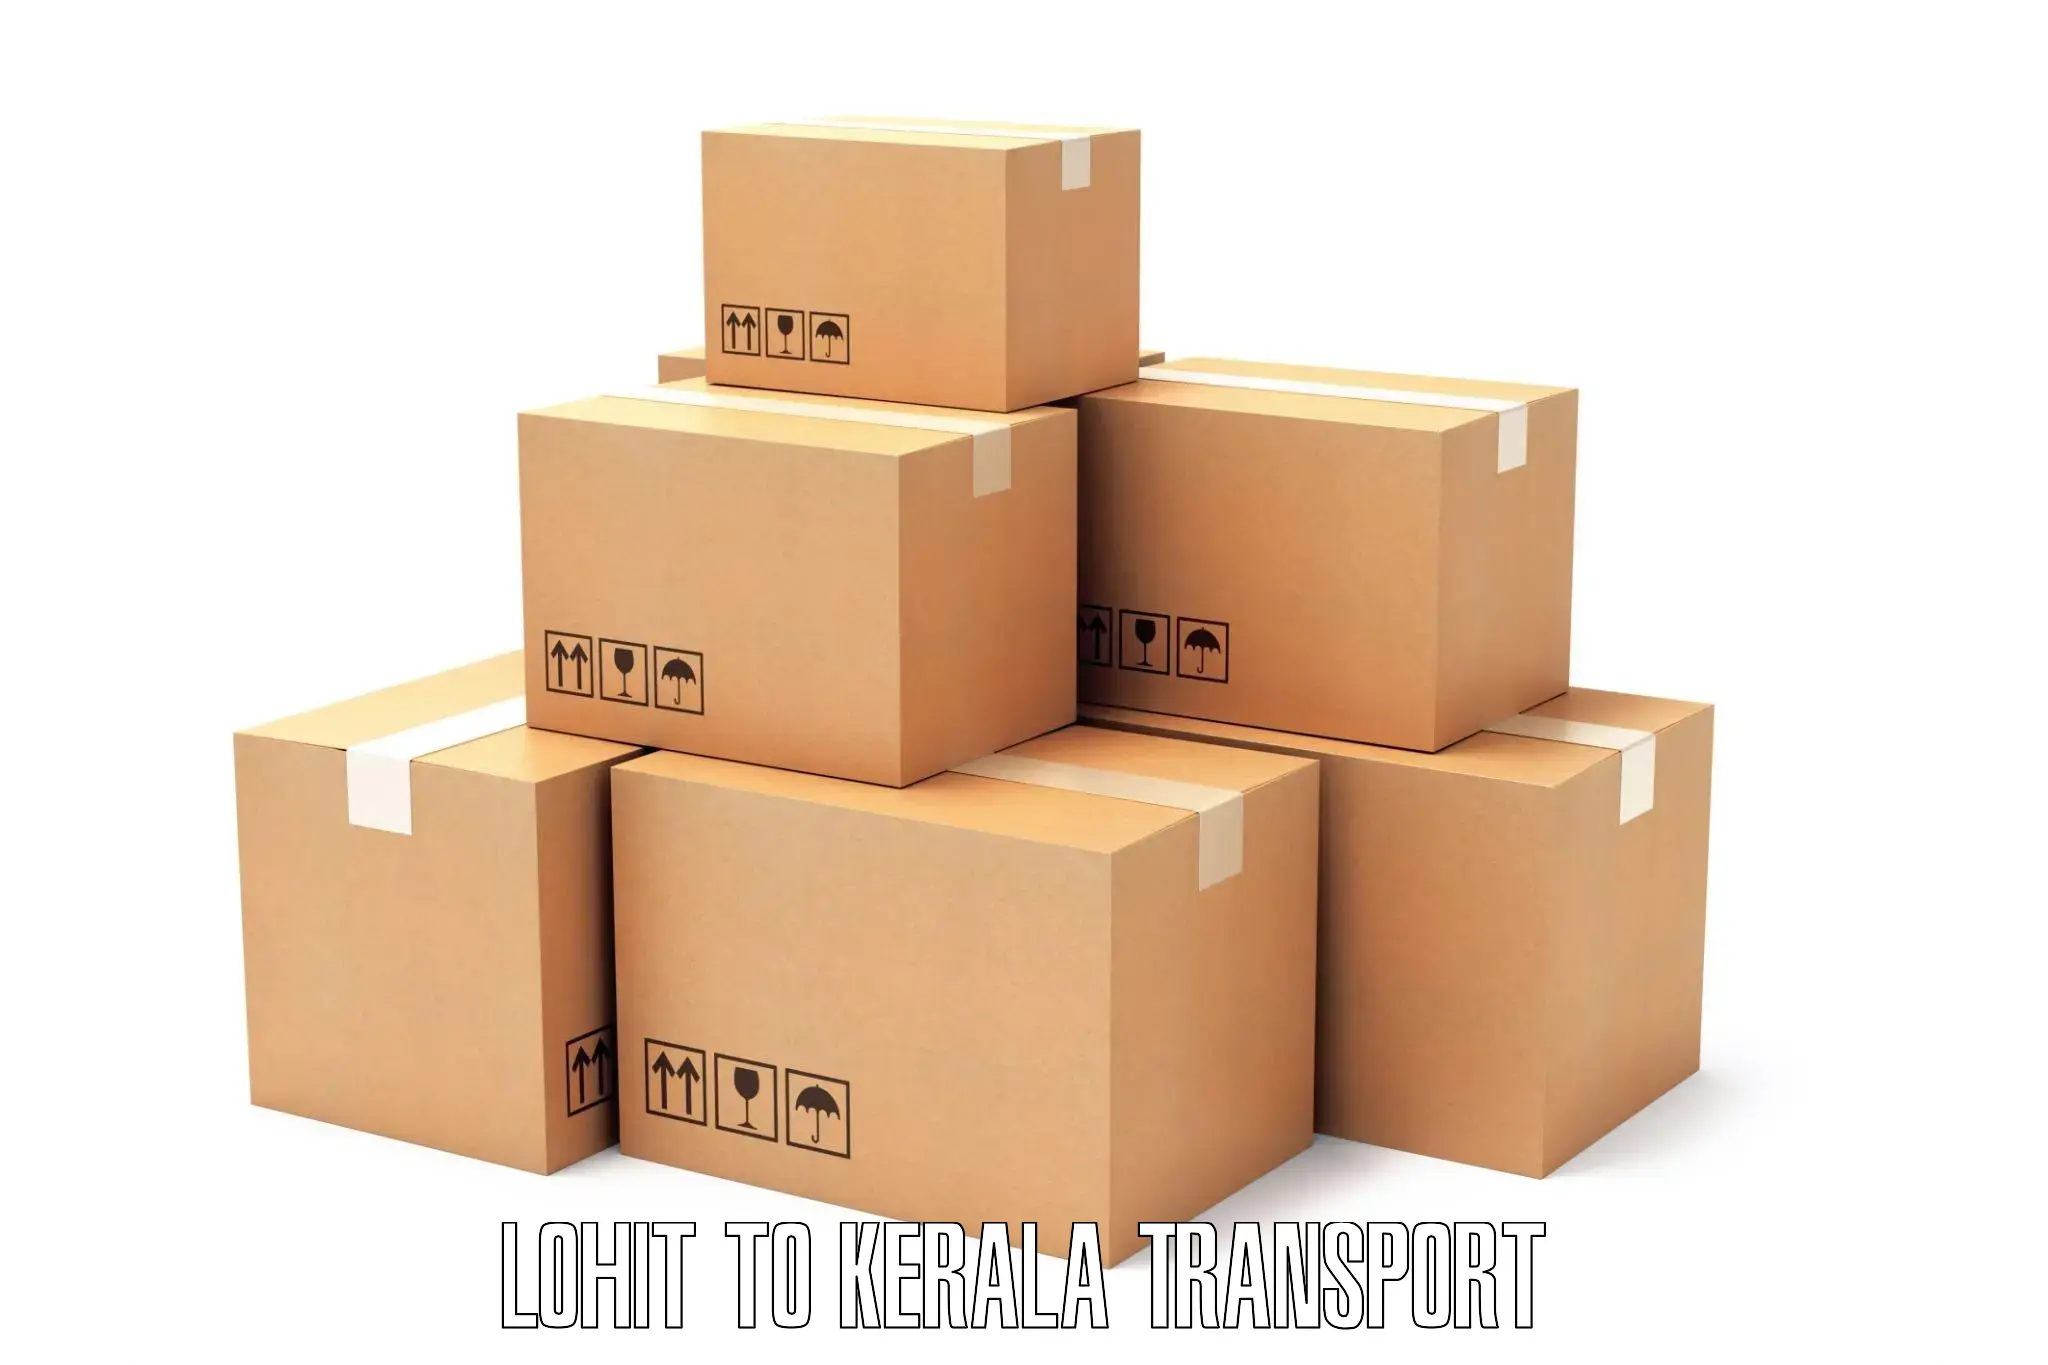 Luggage transport services Lohit to Kerala